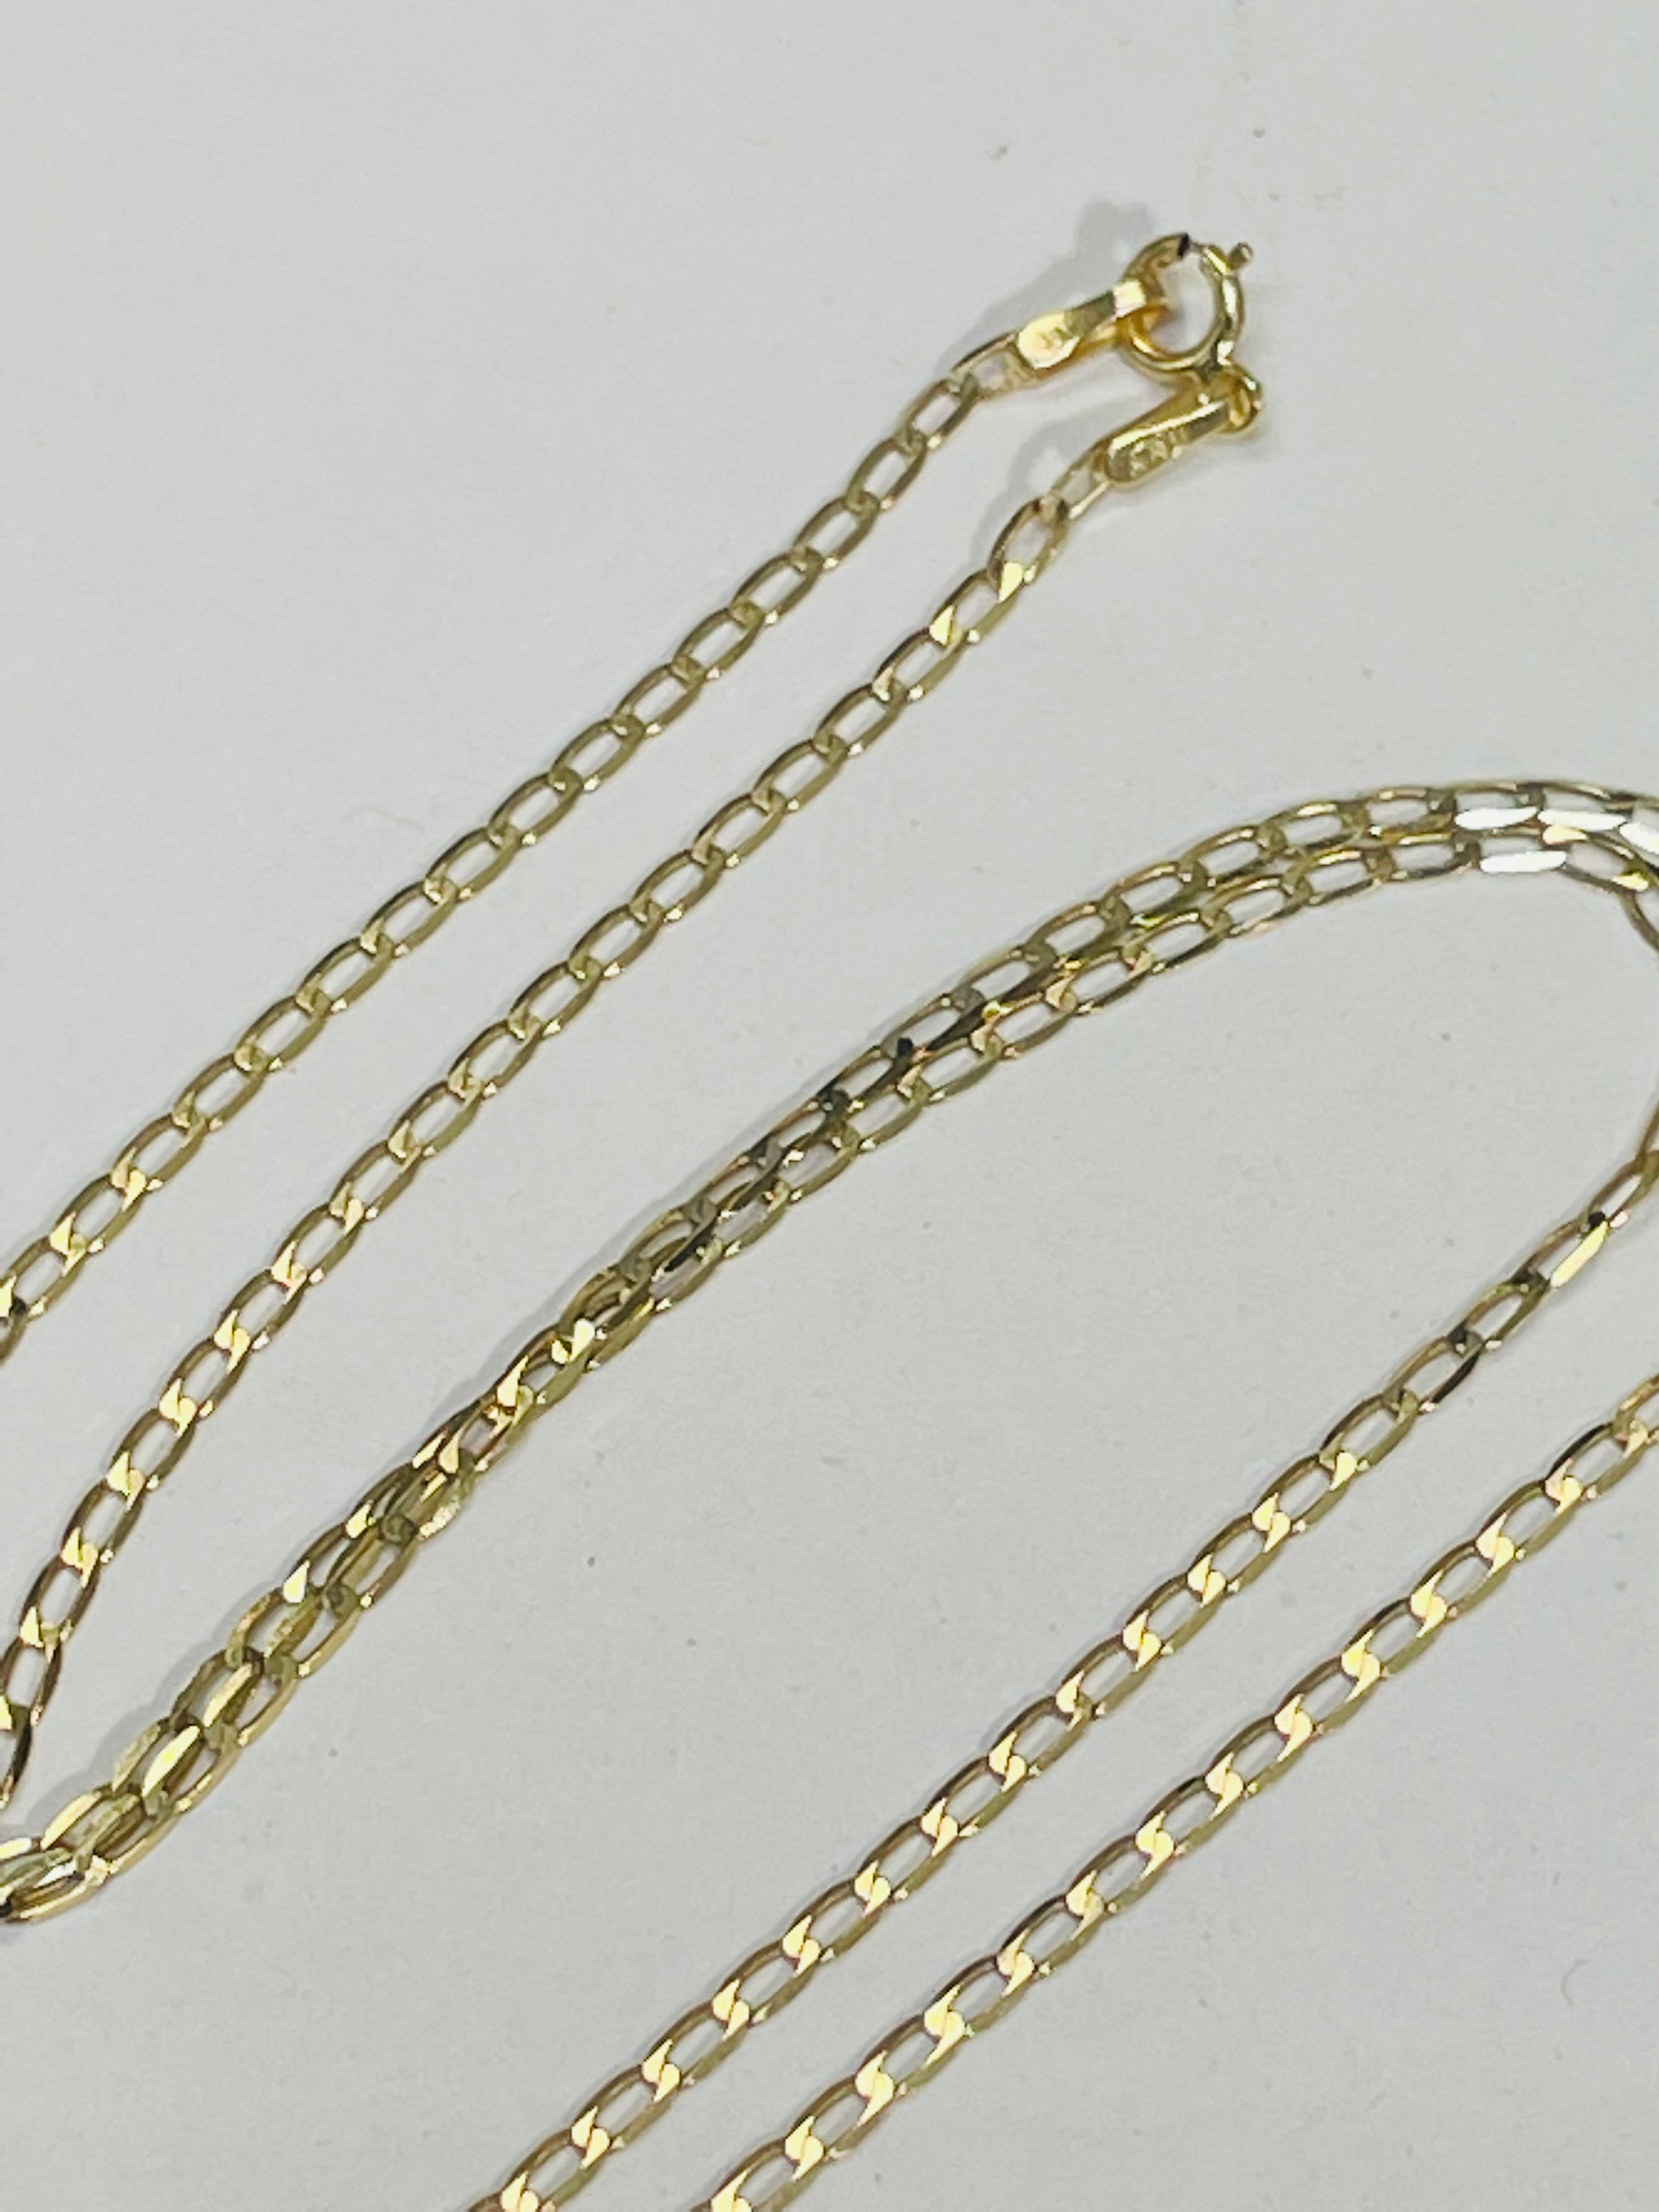 16" 2mm Solid 14K Yellow Gold Curb Link Style Necklace Chain